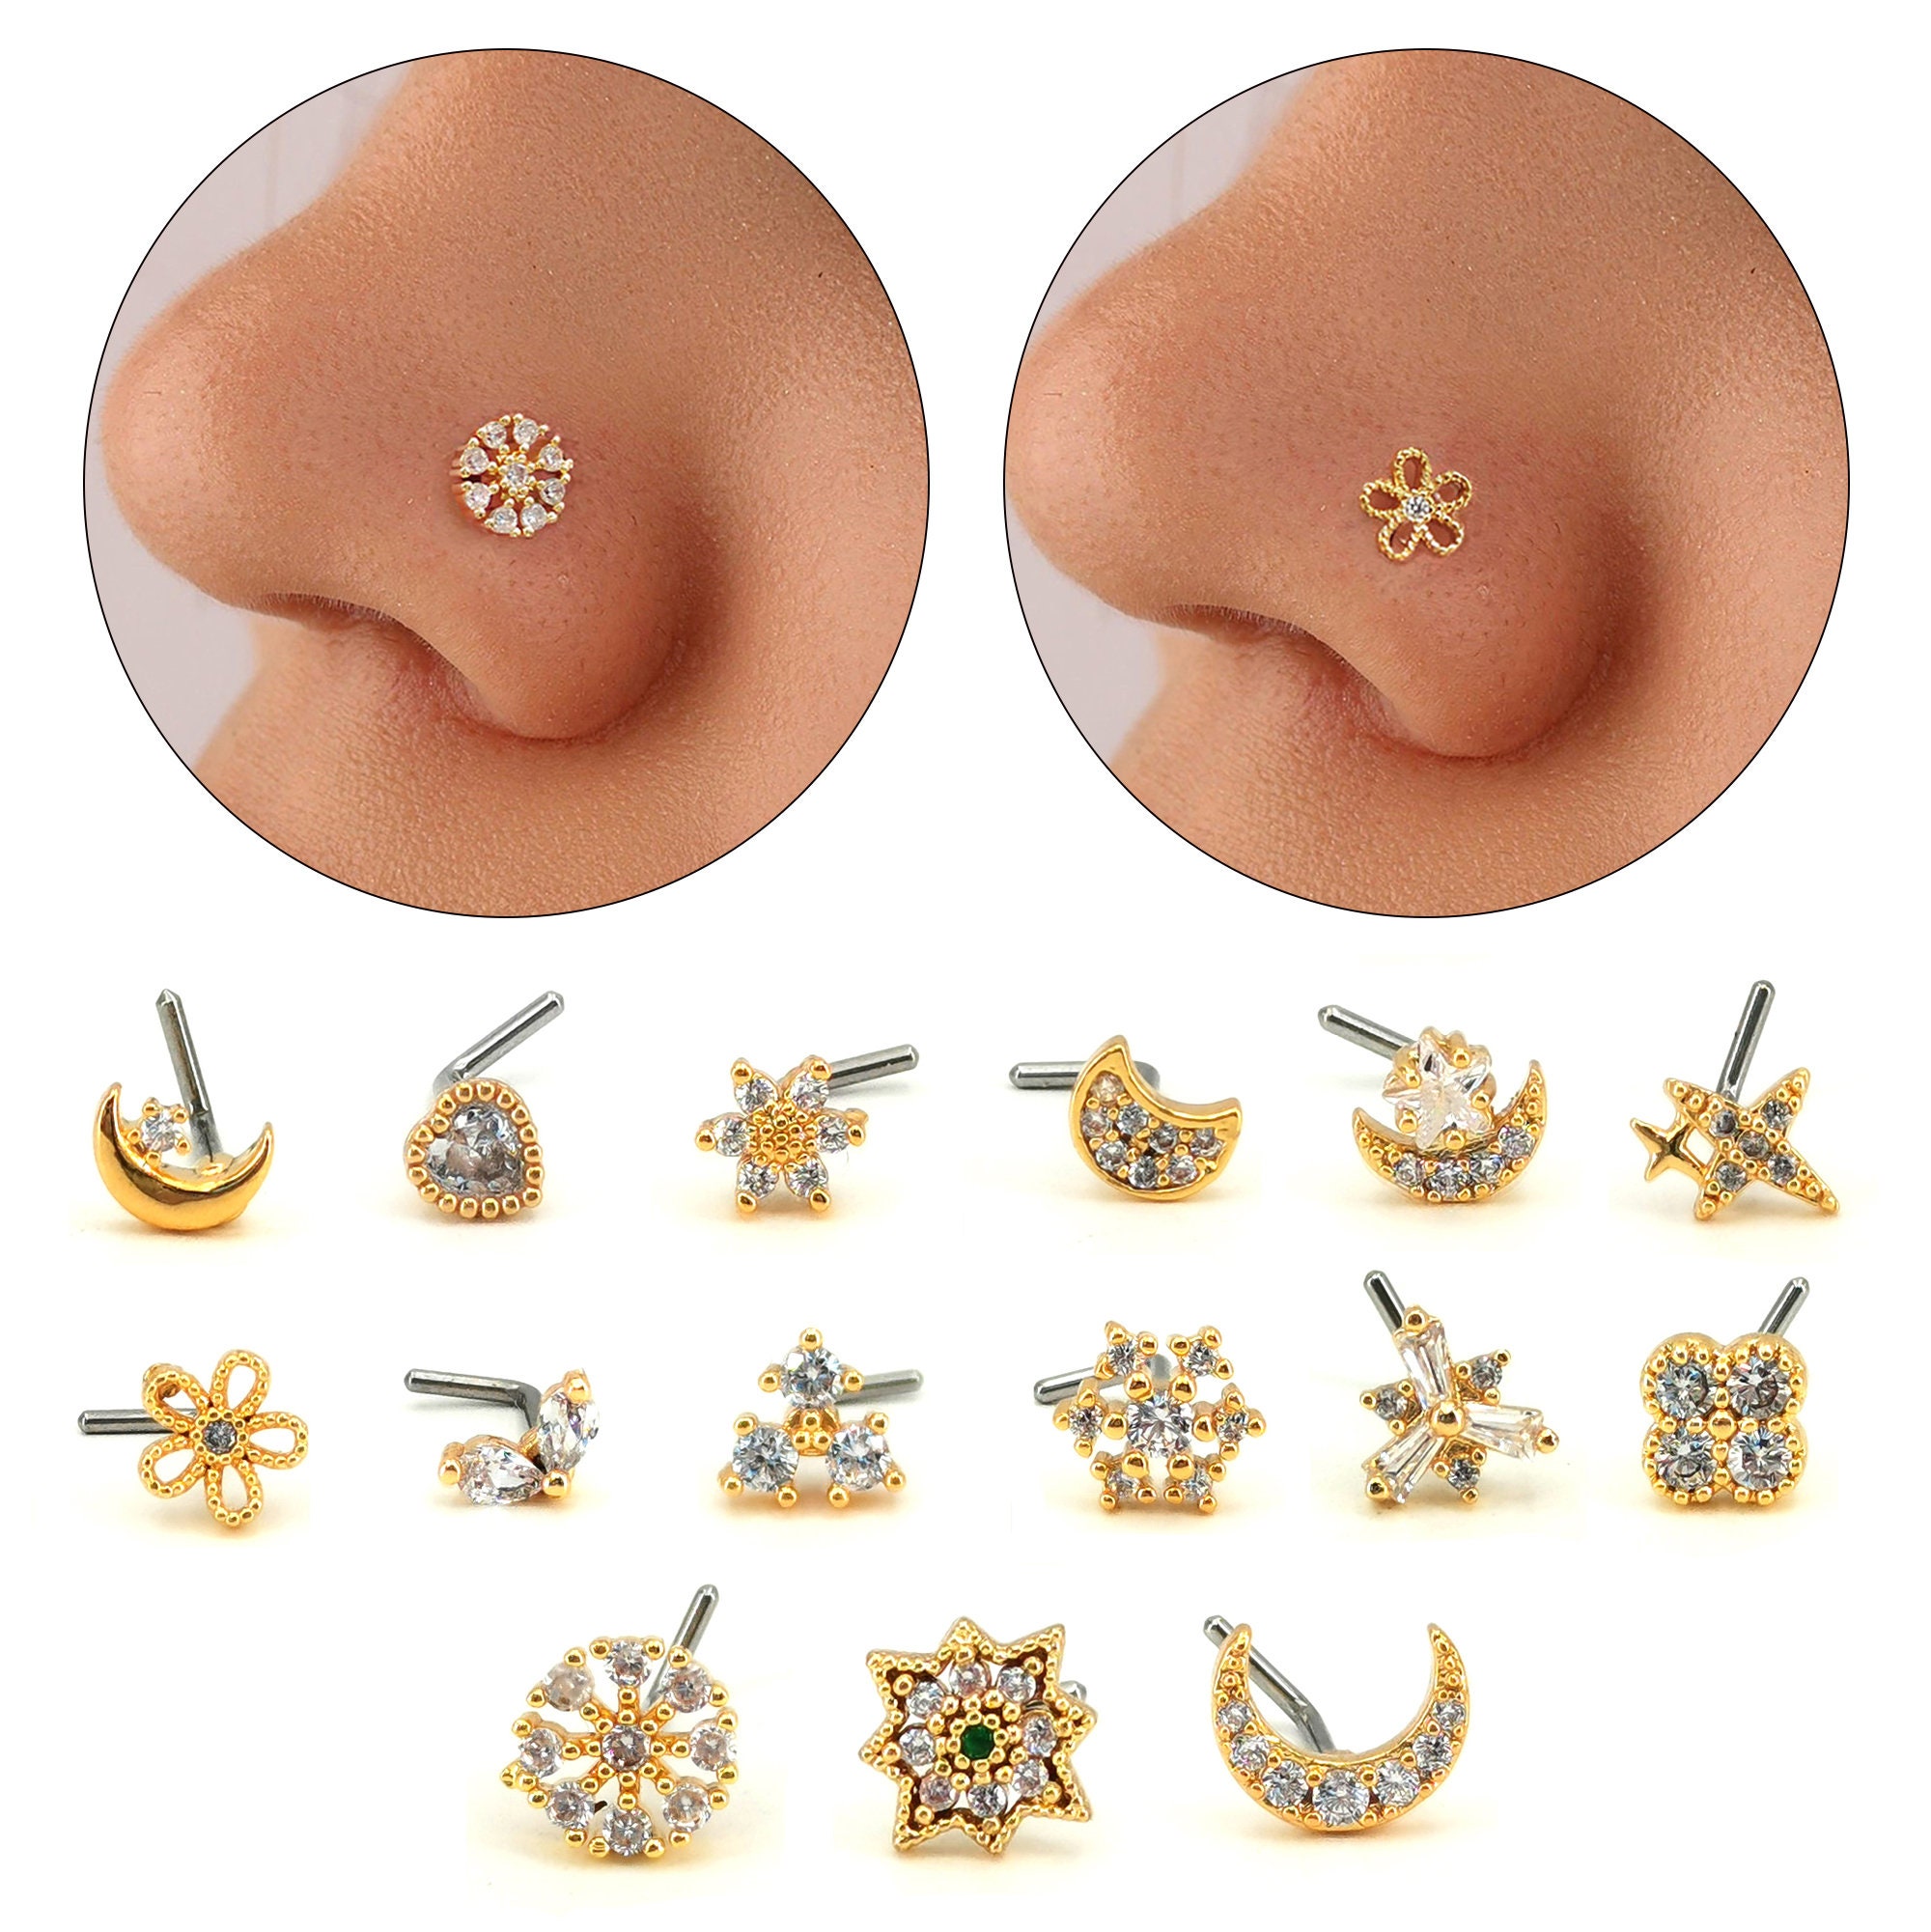 20G Surgical Steel Nose Stud “L” Shaped with Bezel-Set CZ - Silver Safari  Spokane Valley Mall